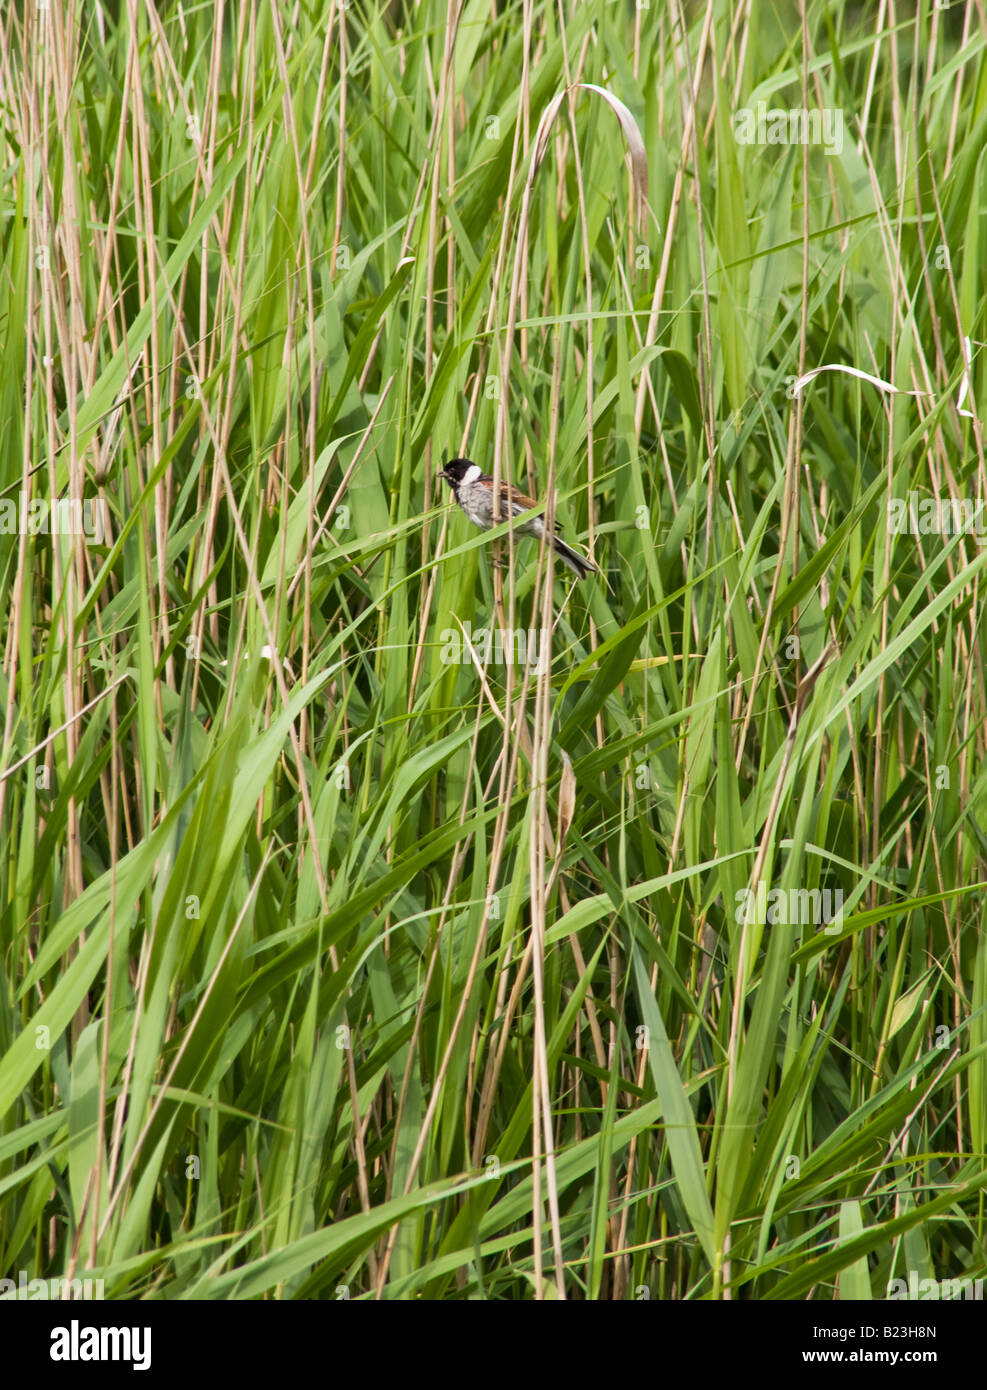 Reed Bunting bird clinging on tall grass Stock Photo